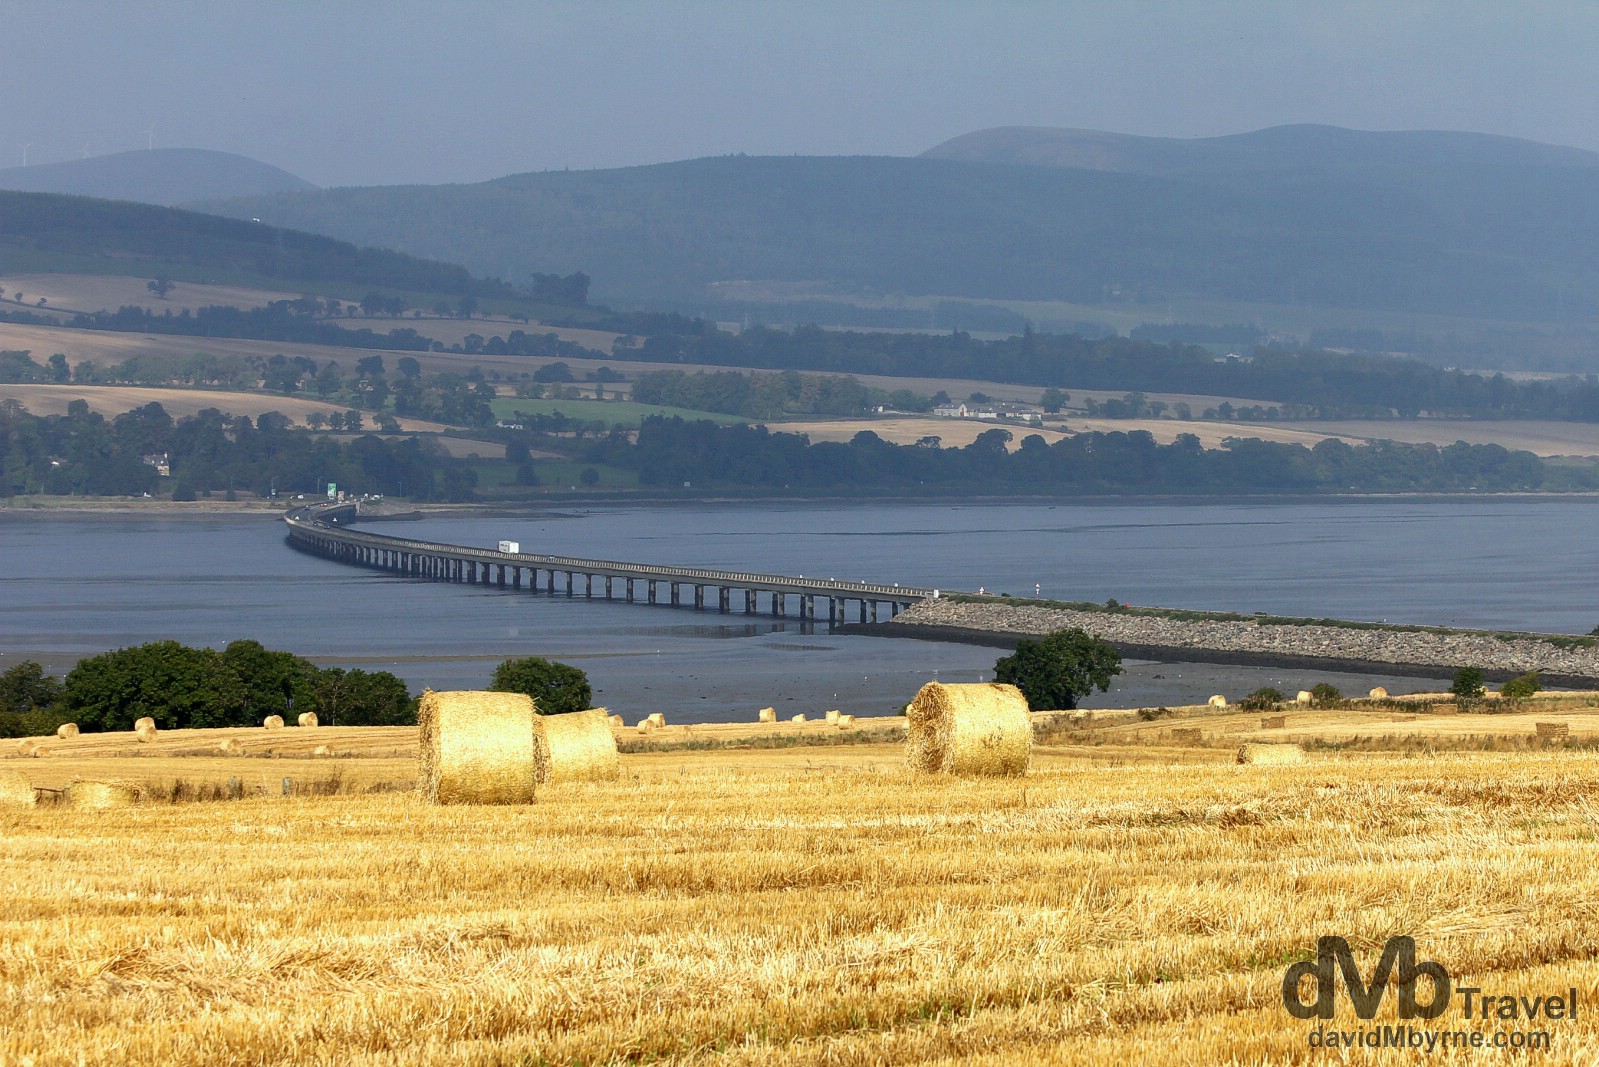 Scenery near the Comarty Bridge crossing Cromarty Forth north of Inverness in Scotland. September 14, 2014.